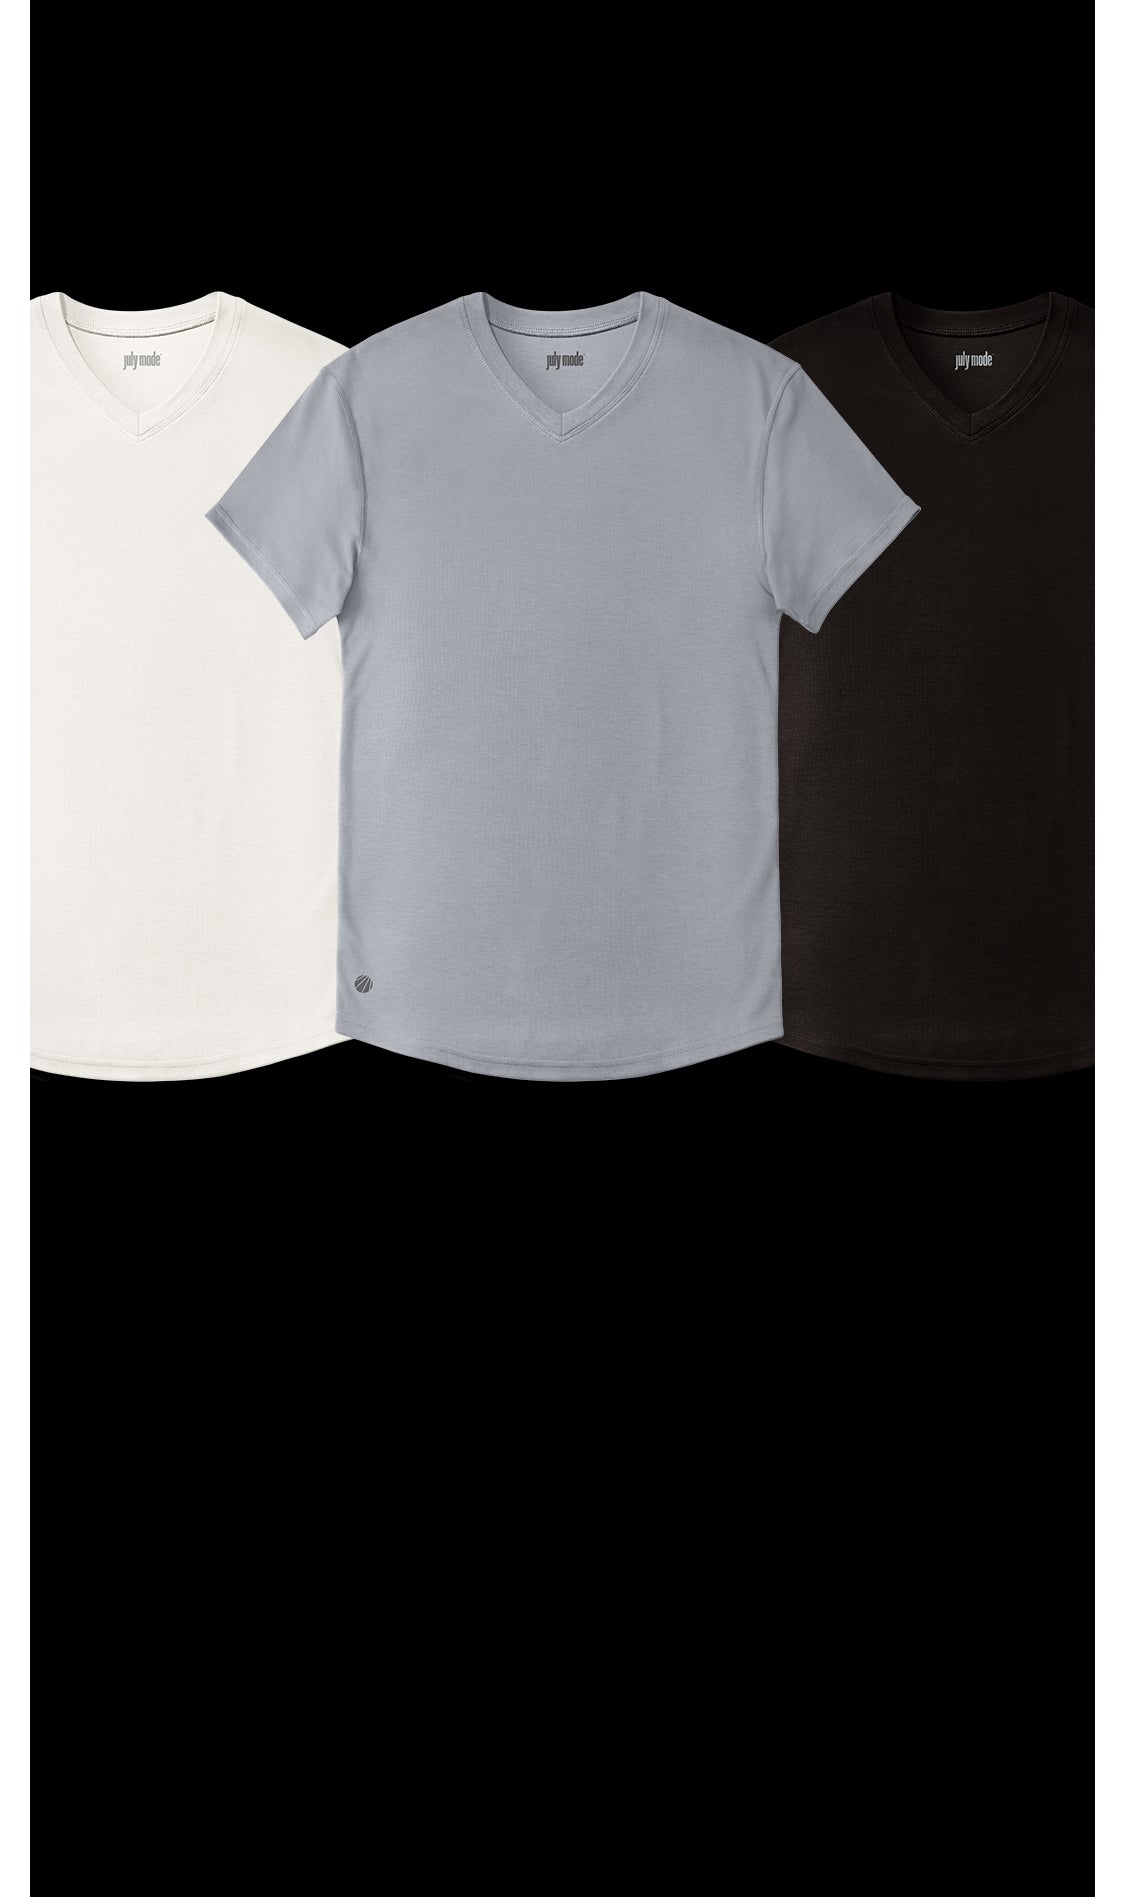 July Mode: Premium Stylish Tees for the Modern Man.